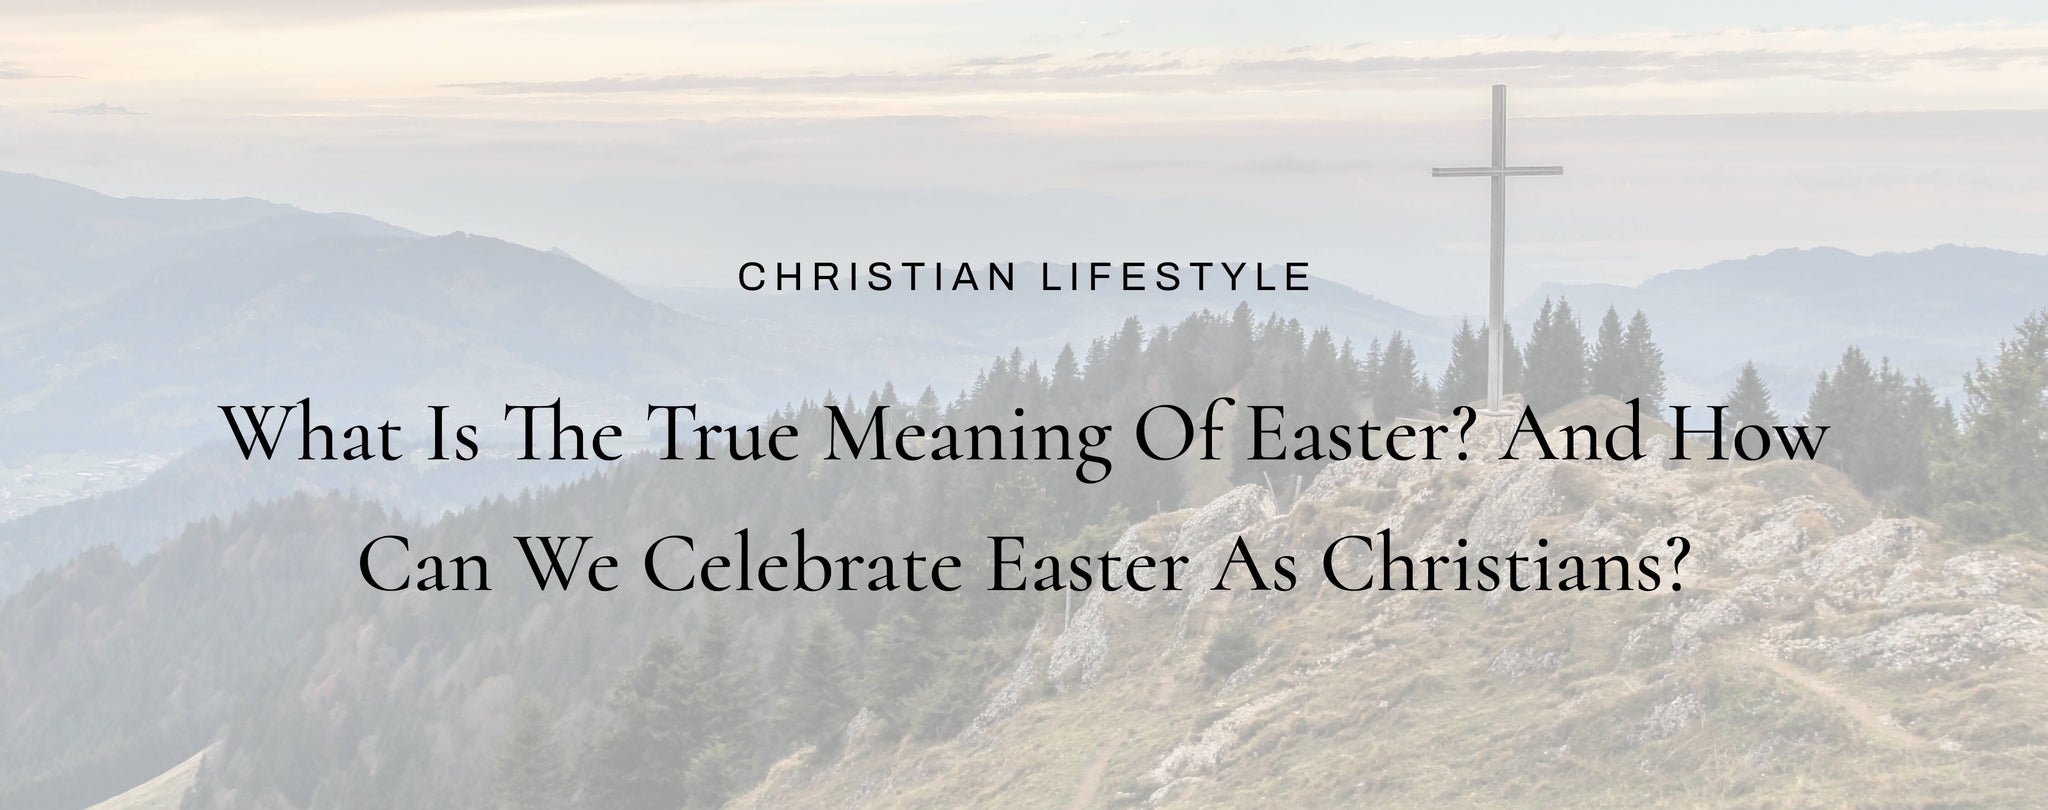 What is the True Meaning of Easter? And How Can We Celebrate Easter As Christians?